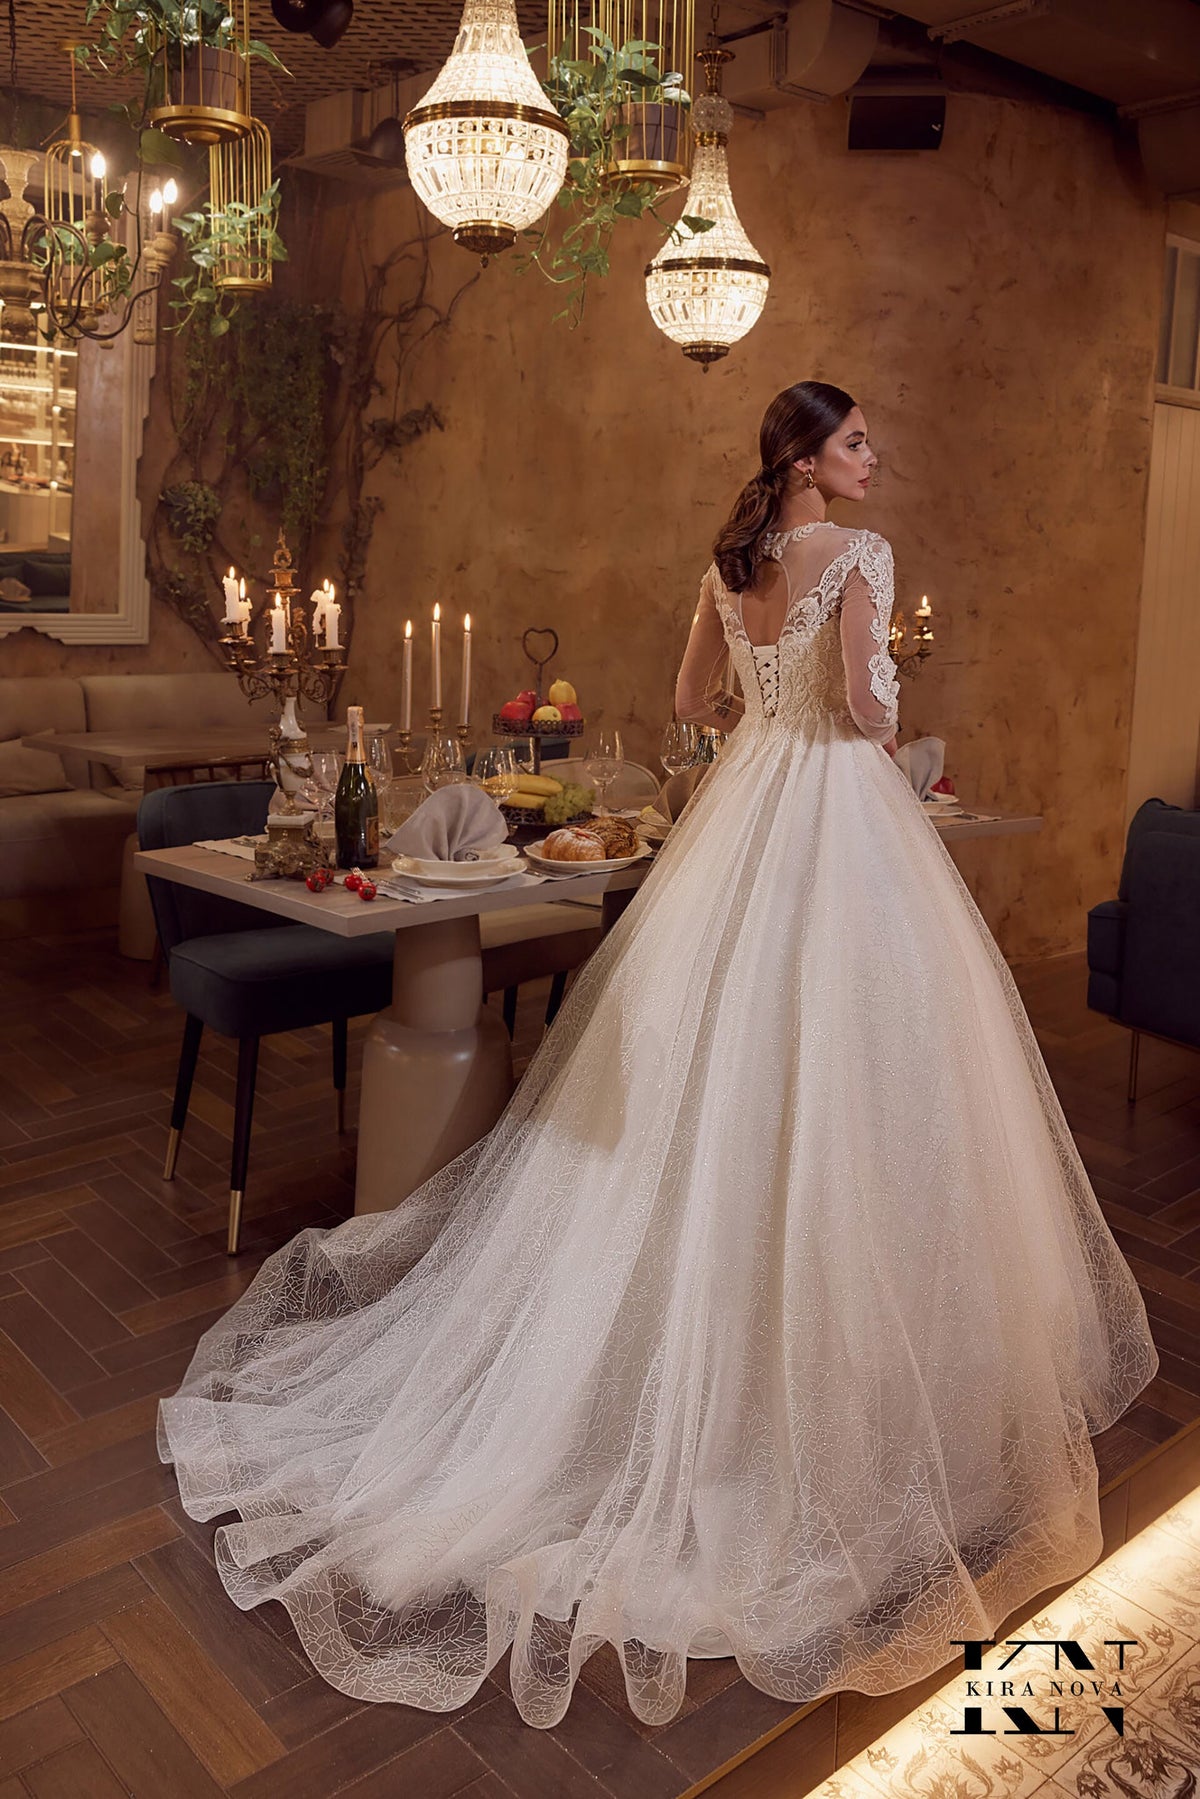 Classic Sparkle Ball Gown Wedding Dress Long Illusion Sleeves Sweetheart Neckline Luxury Bridal Gown Corset Keyhole Back